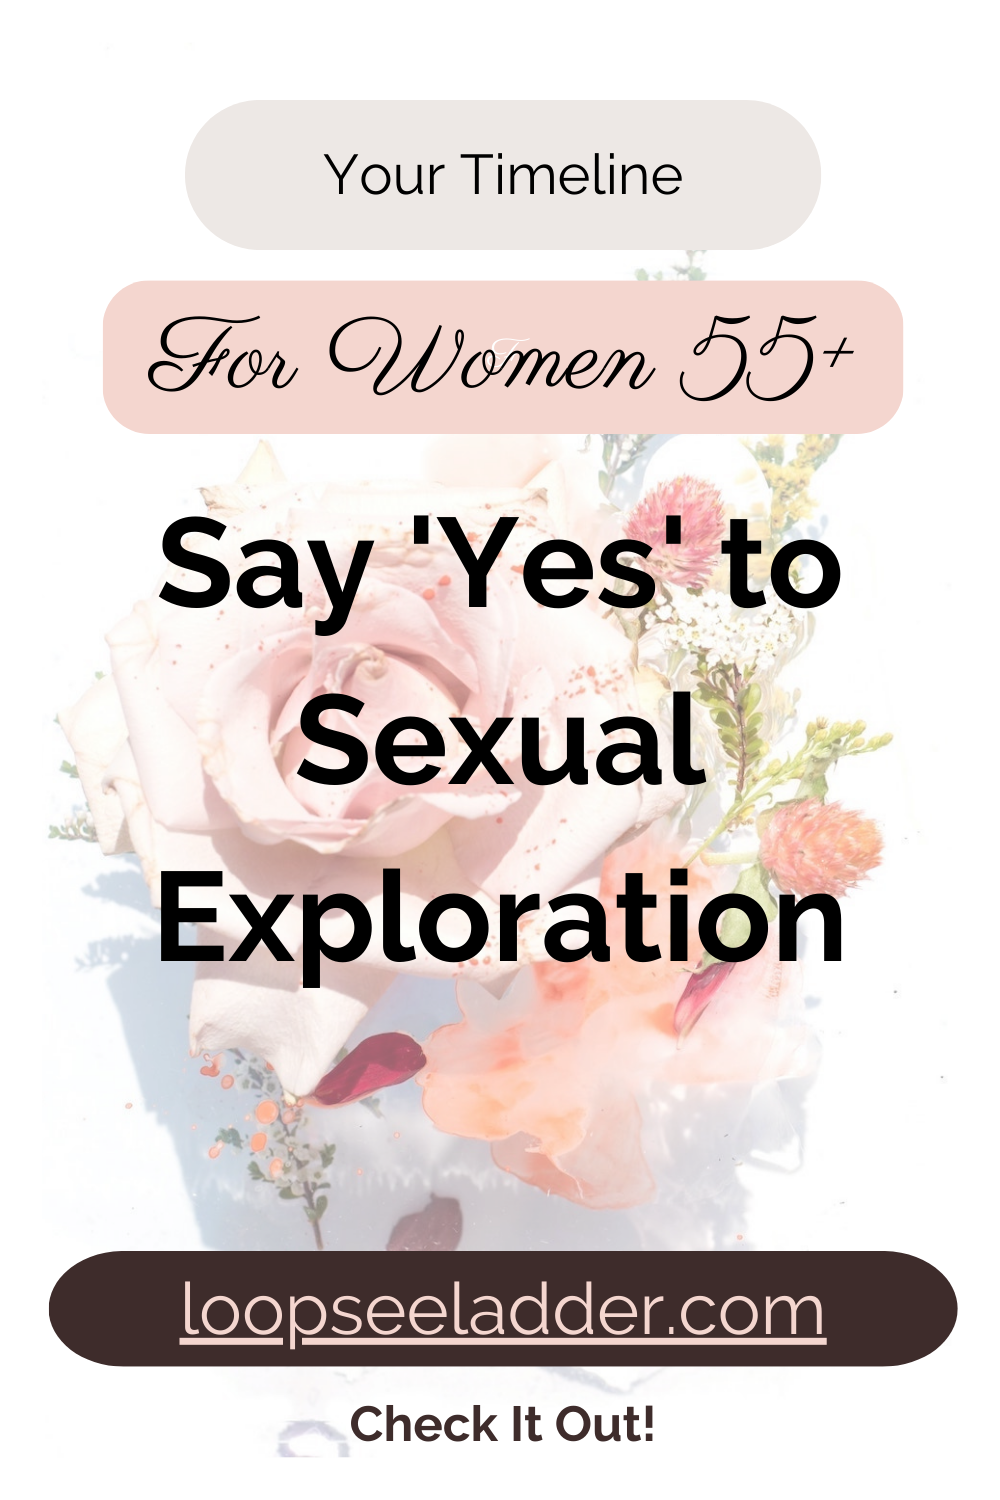 Why Women Over 55 Are Saying ‘Yes’ to Sexual Exploration